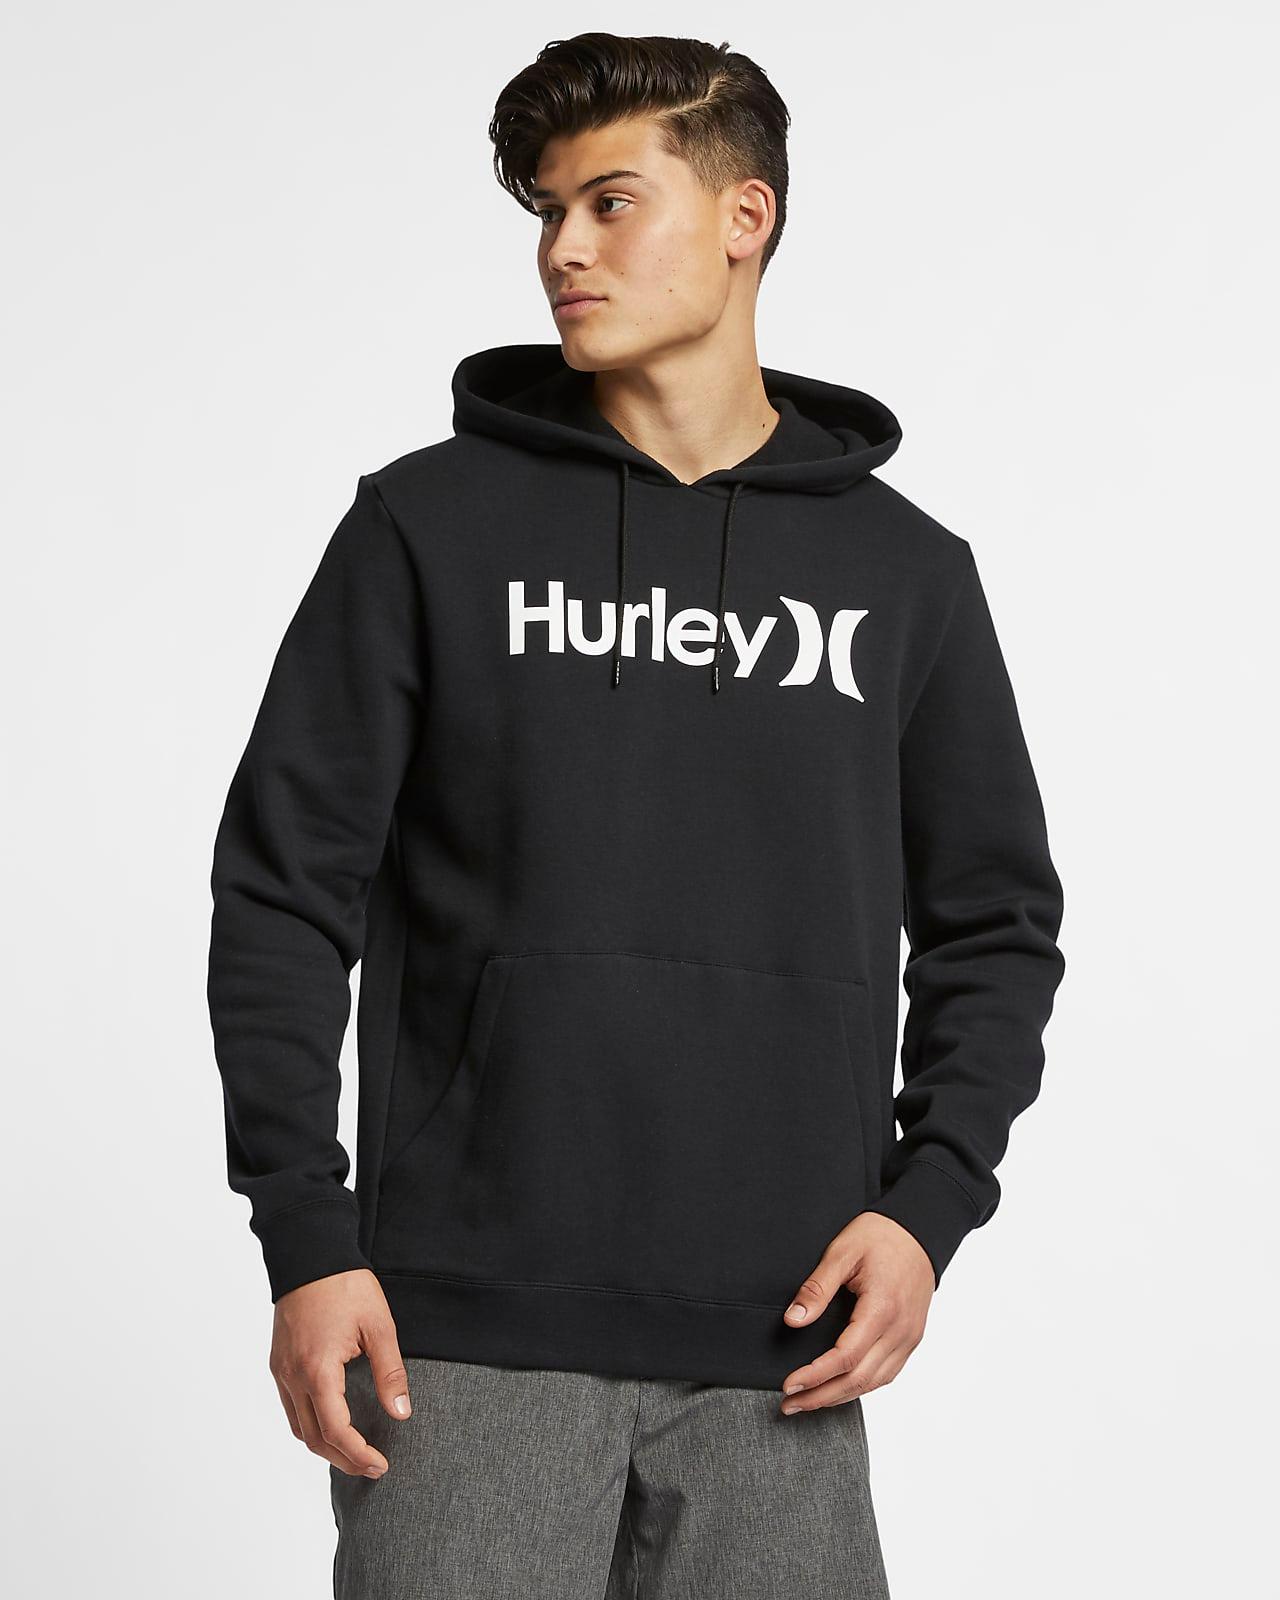  Surf Check One & Only P/O Hoodie - Black